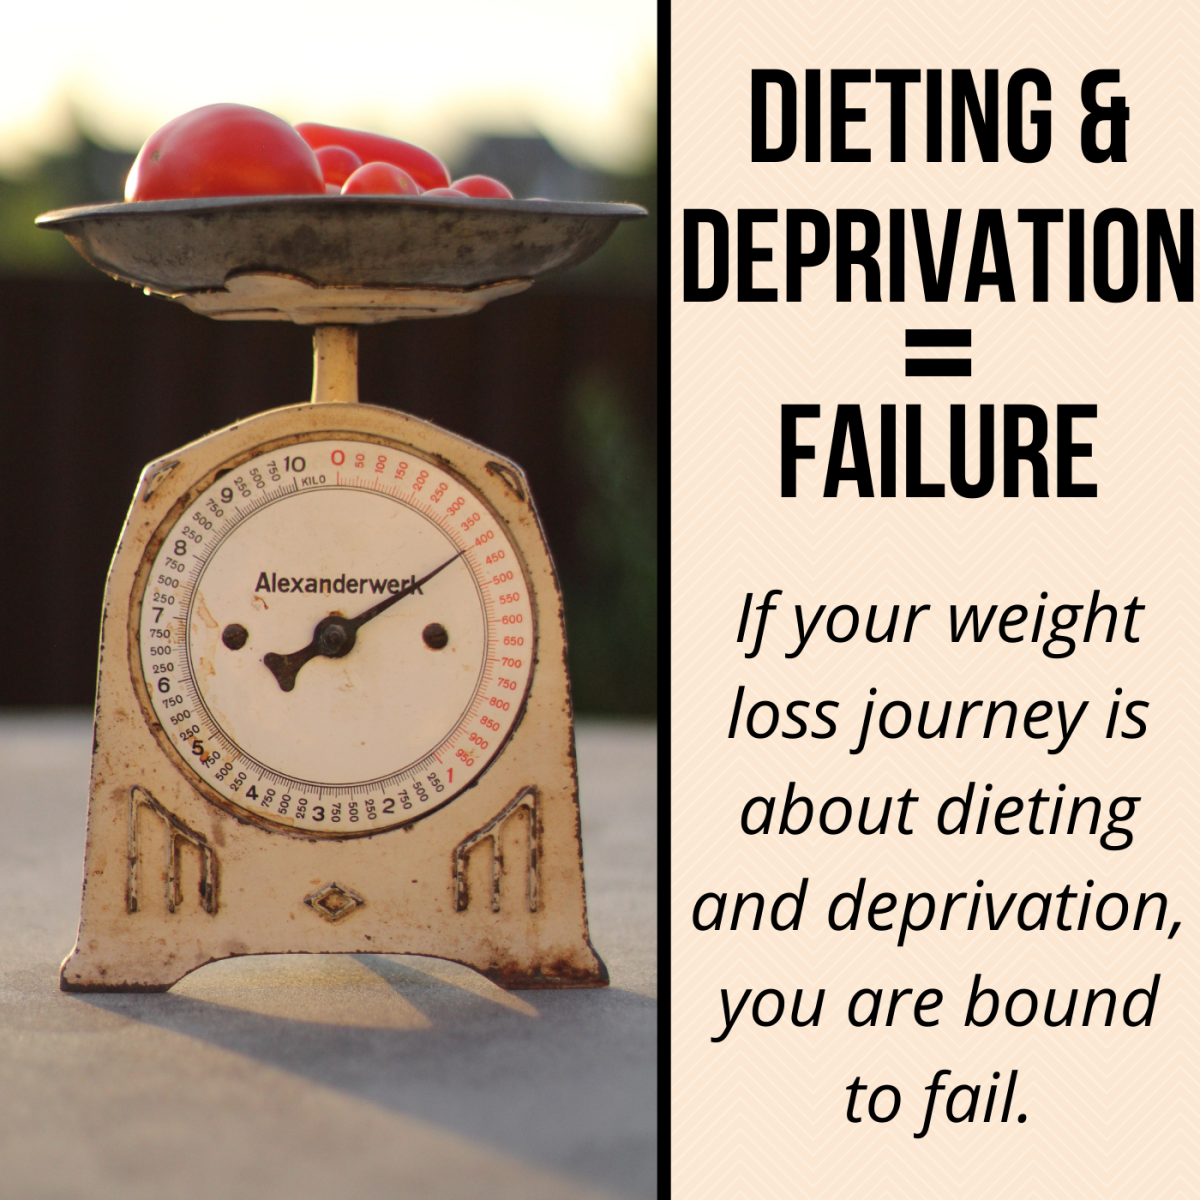 How to Stay Motivated and Not Feel Deprived While Losing Weight